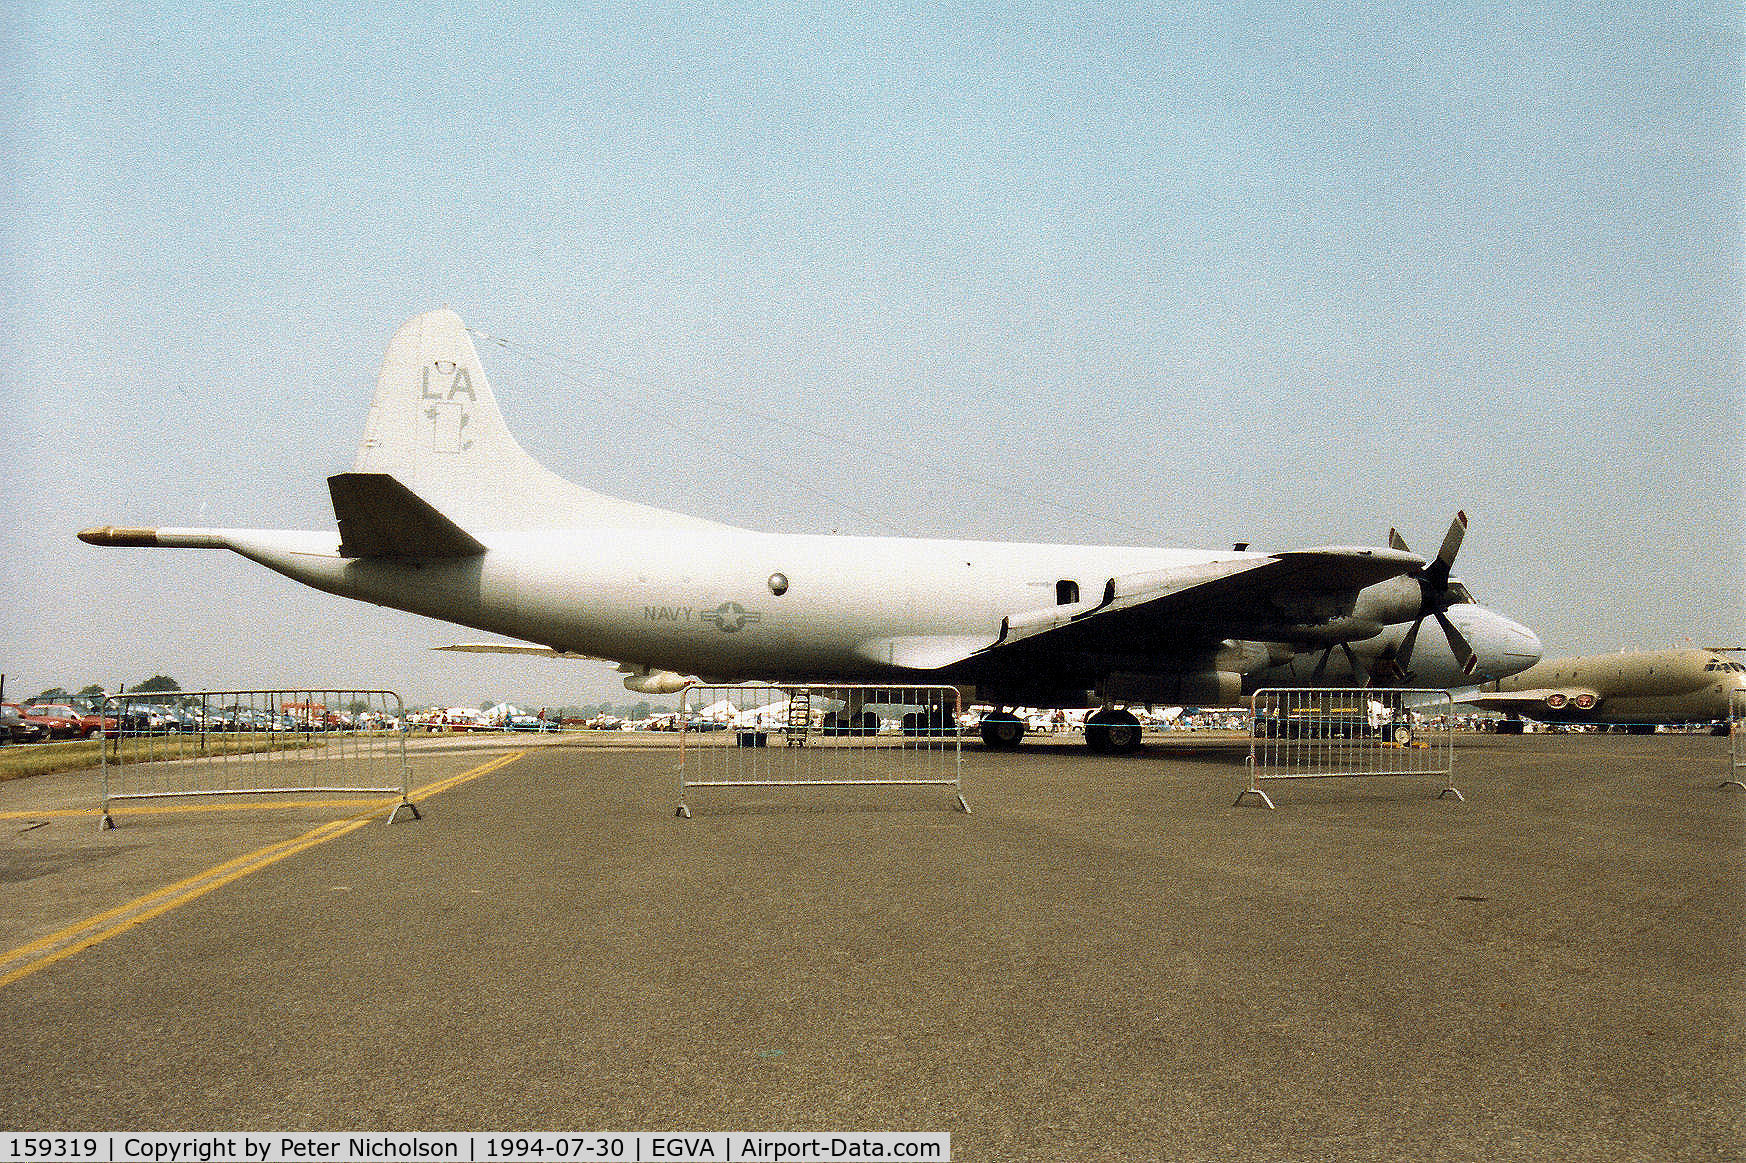 159319, 1974 Lockheed P-3C Orion C/N 285A-5609, P-3C Orion of Patrol Squadron VP-5 at Naval Air Station Jacksonville on display at the 1994 Intnl Air Tattoo at RAF Fairford.